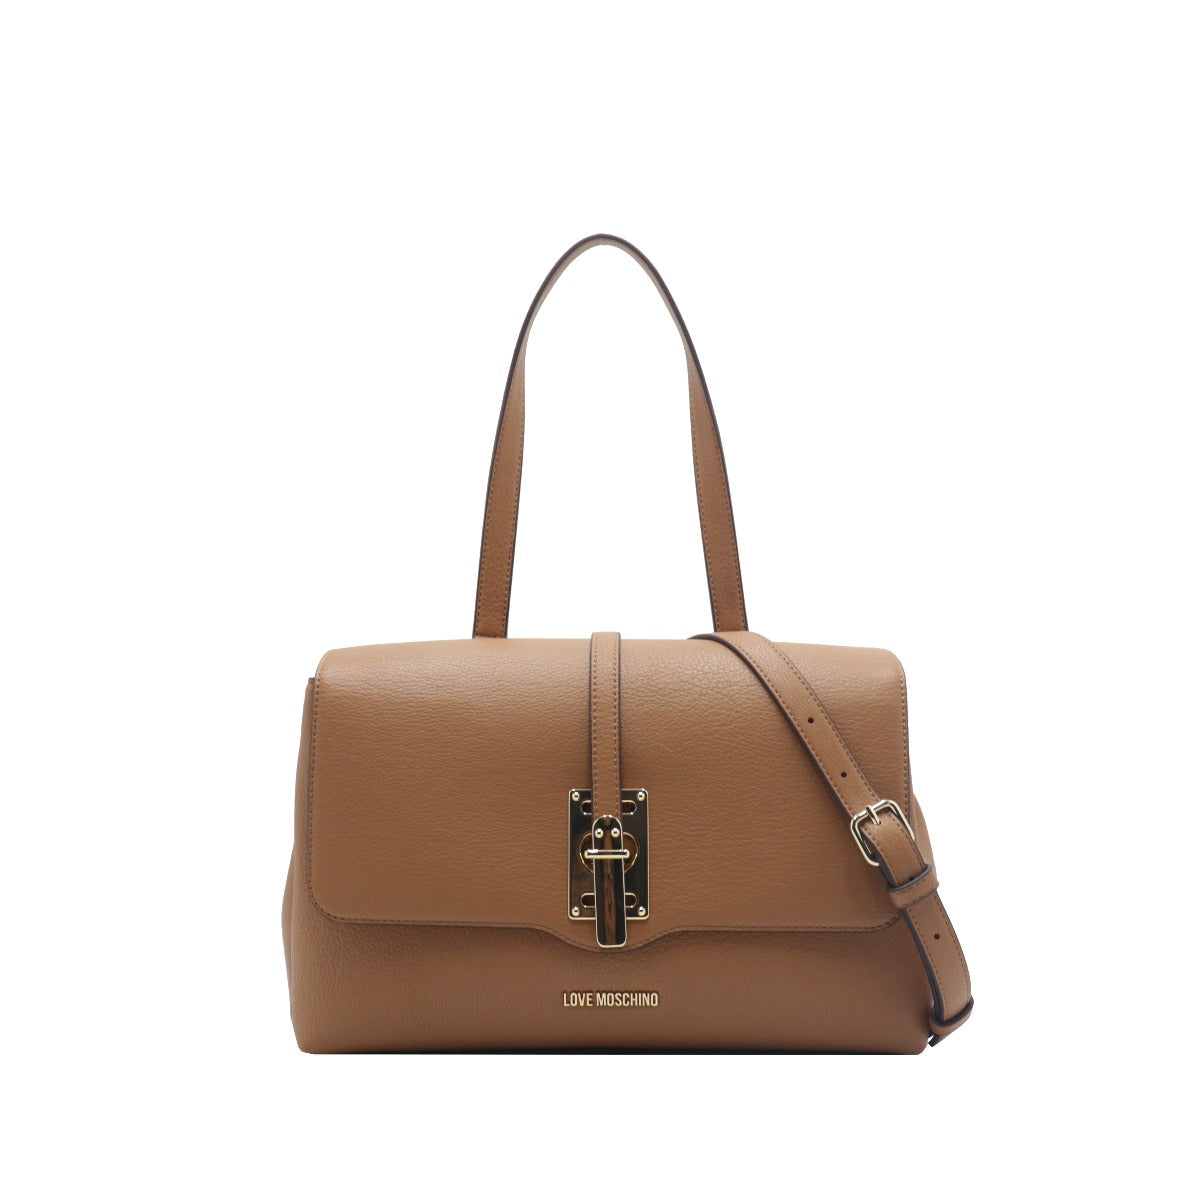 Love Moschino Handbag with Shoulder Strap with Camel Gold Buckle